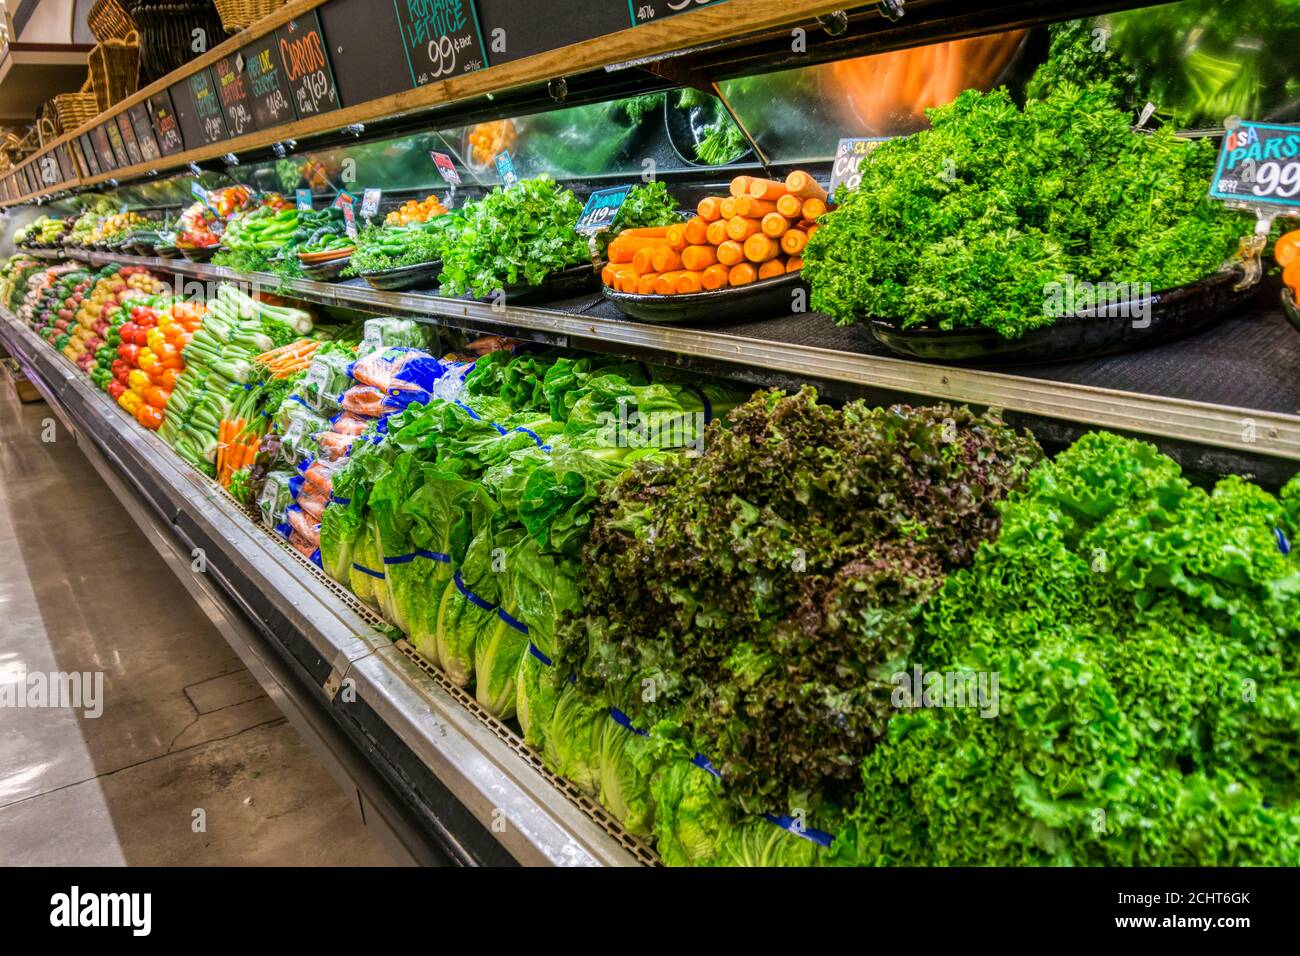 Grocery Store Produce Aisle stock photo